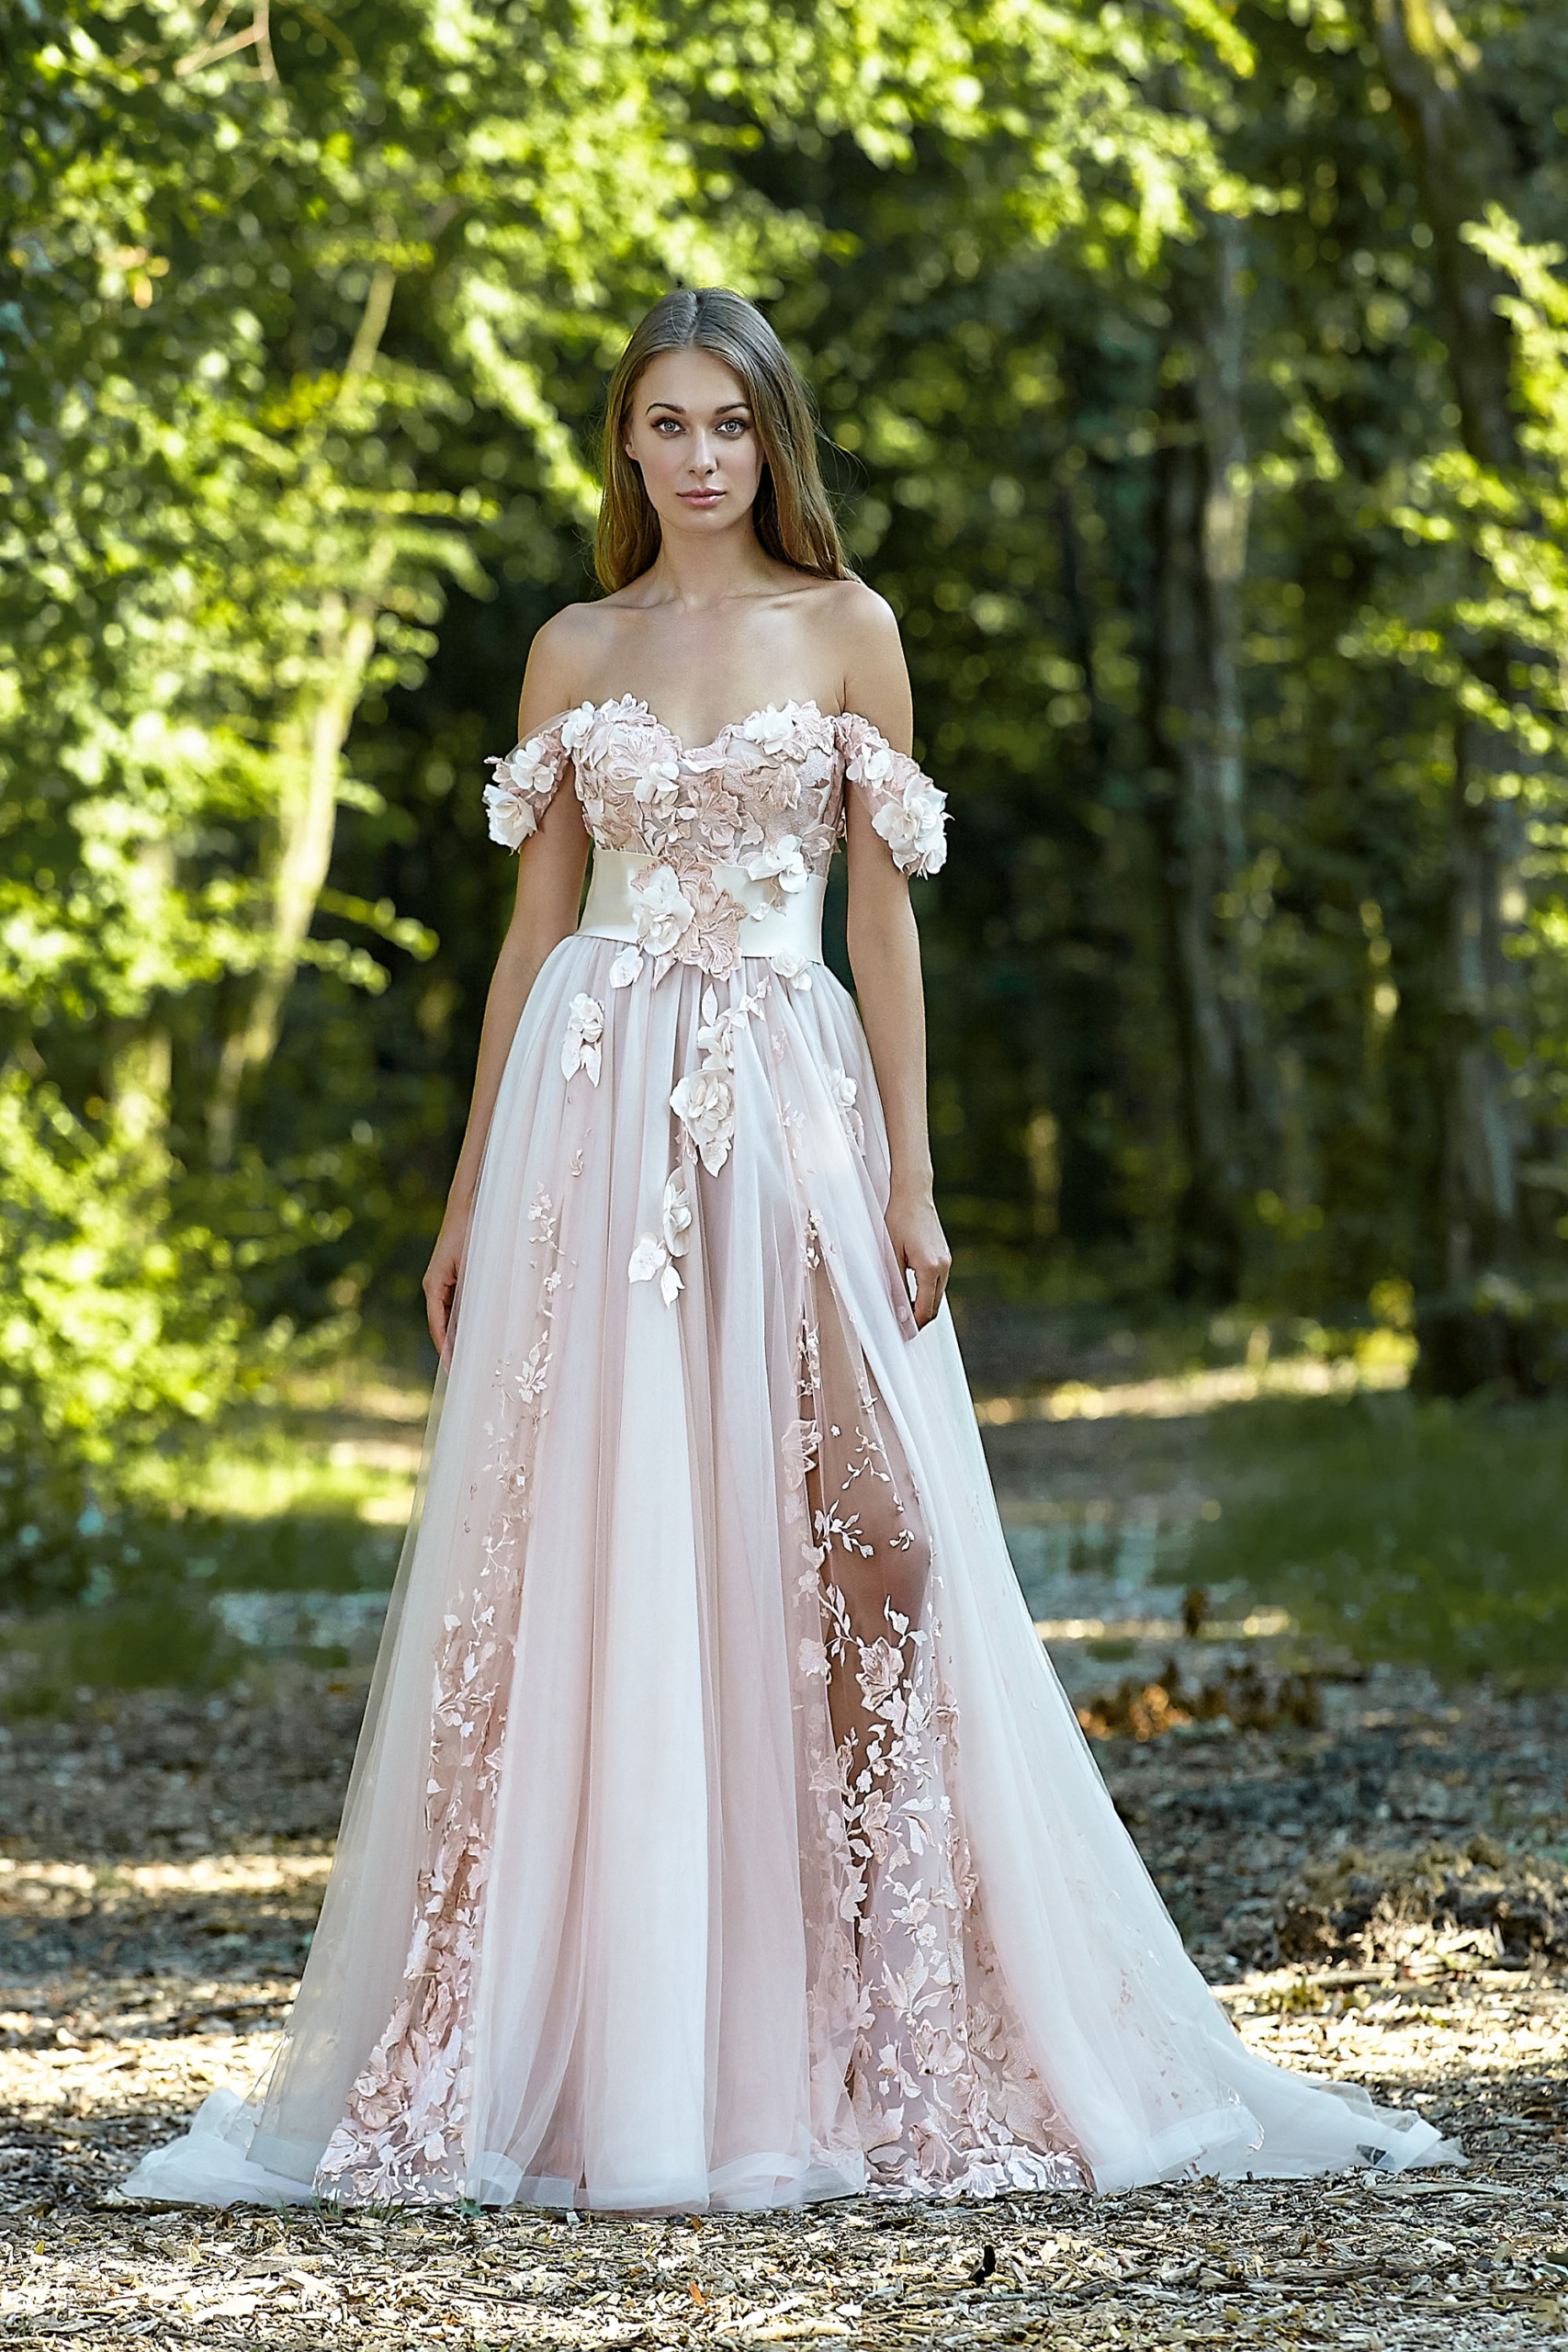 Wedding Dress Trends 2025: Let's Take a Look - Experience The Thrill of Being a Bride Beauty Icon Between Art and Fashion - Vogue Style 100% Made in Italy for a Fairytale Wedding 